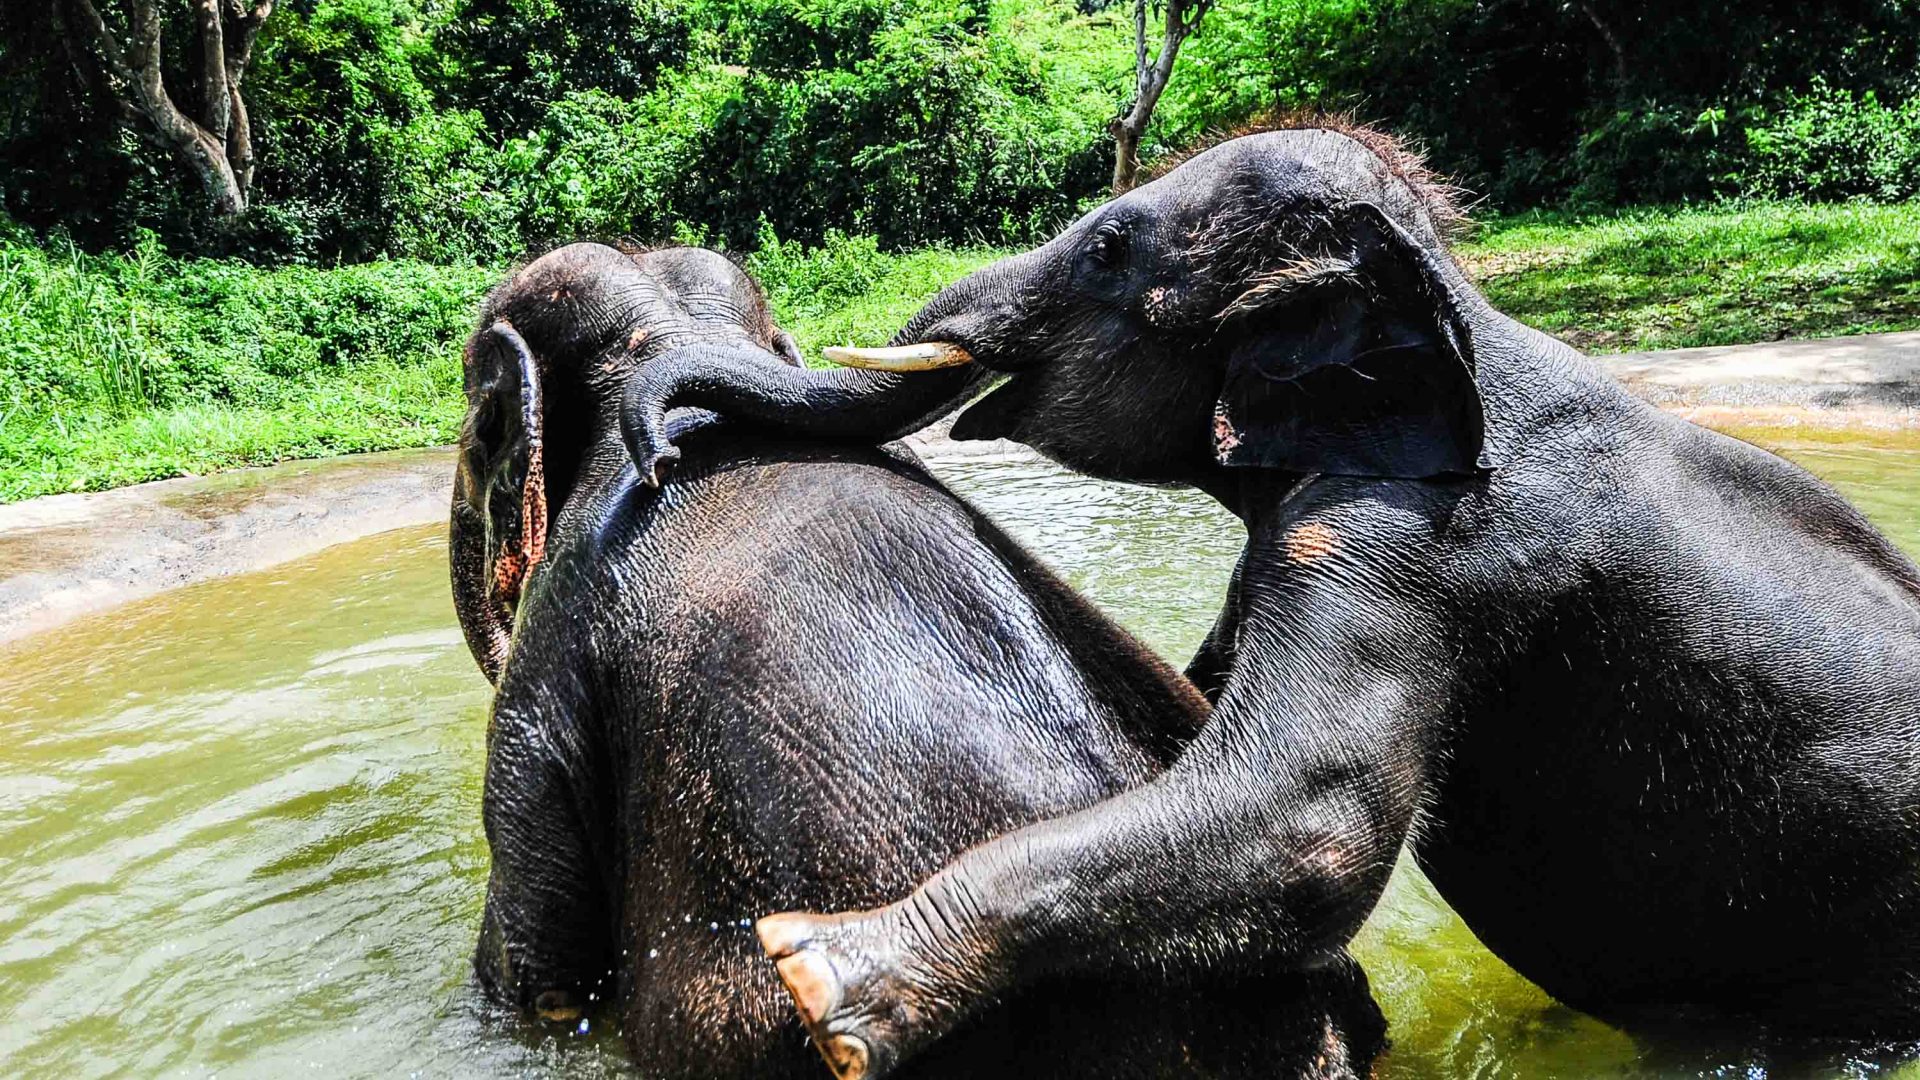 Two elephants play in the water.